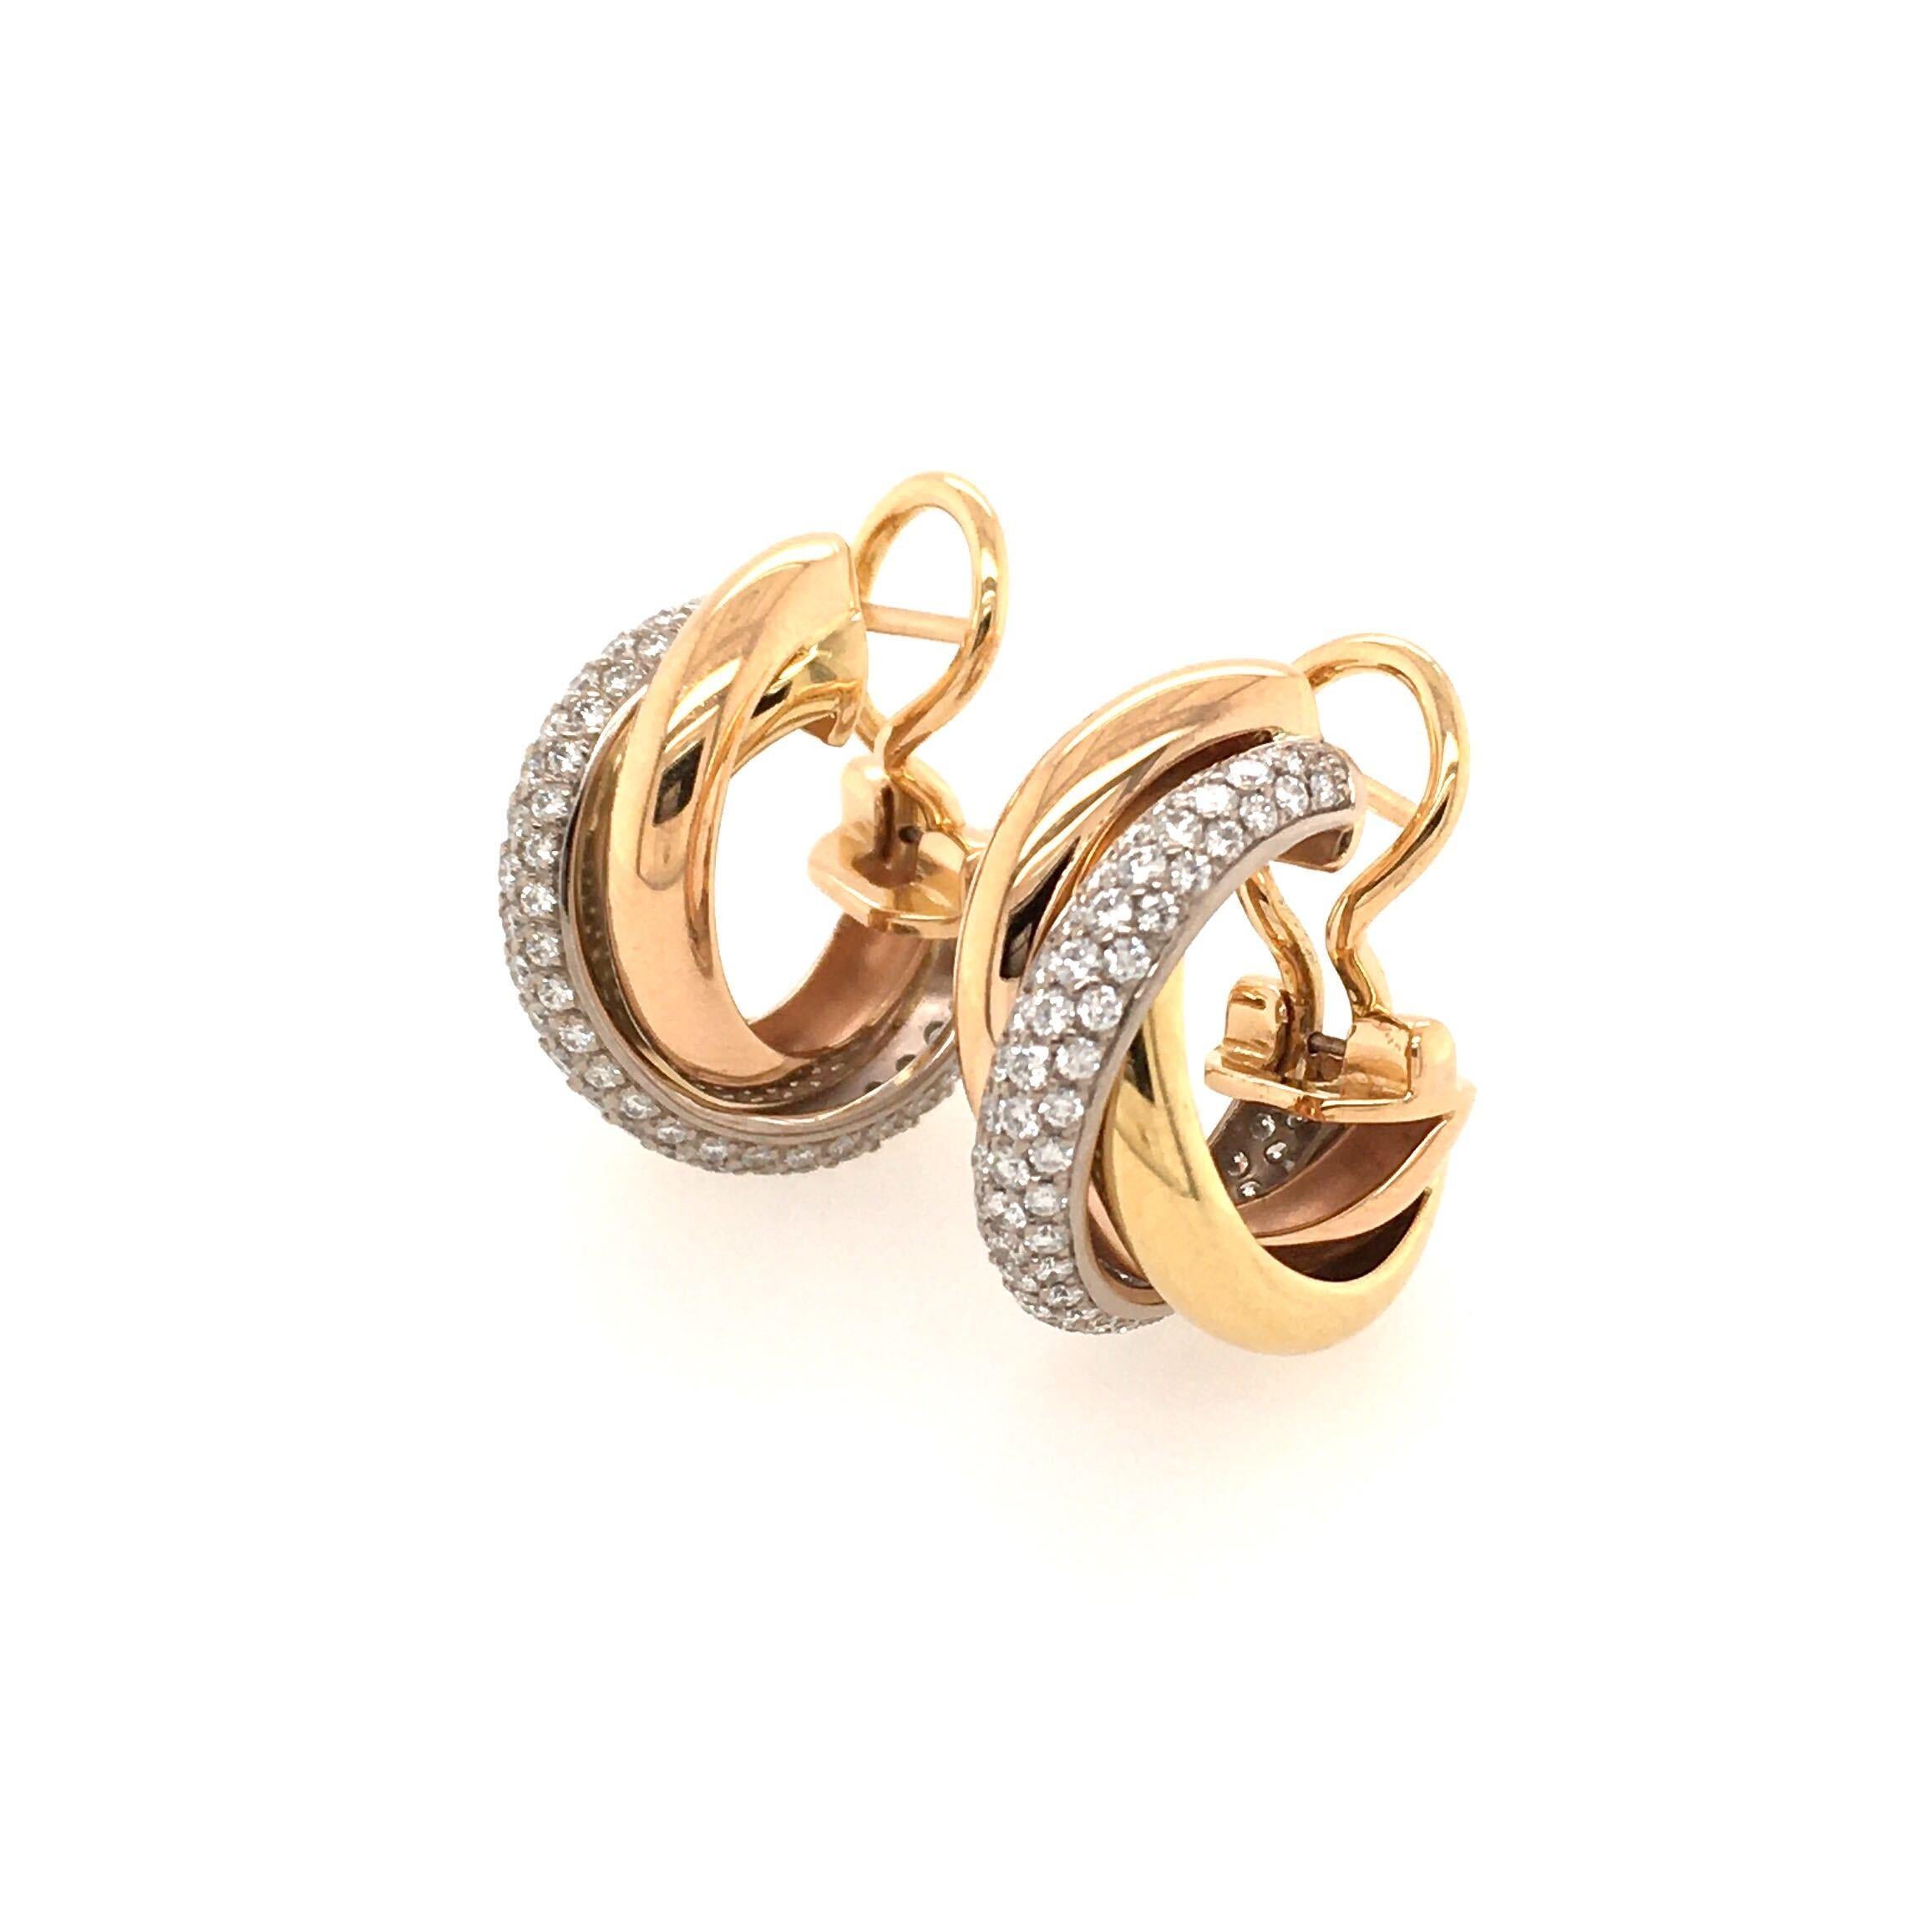 A pair of 18 karat rose, yellow  and white gold and diamond Trinity. earrings. Cartier. Designed as a small hoop, enhanced by pave set diamonds. Seventy one (71) diamonds weigh approximately 0.80 carat. Length is approximately 3/4 inches, gross